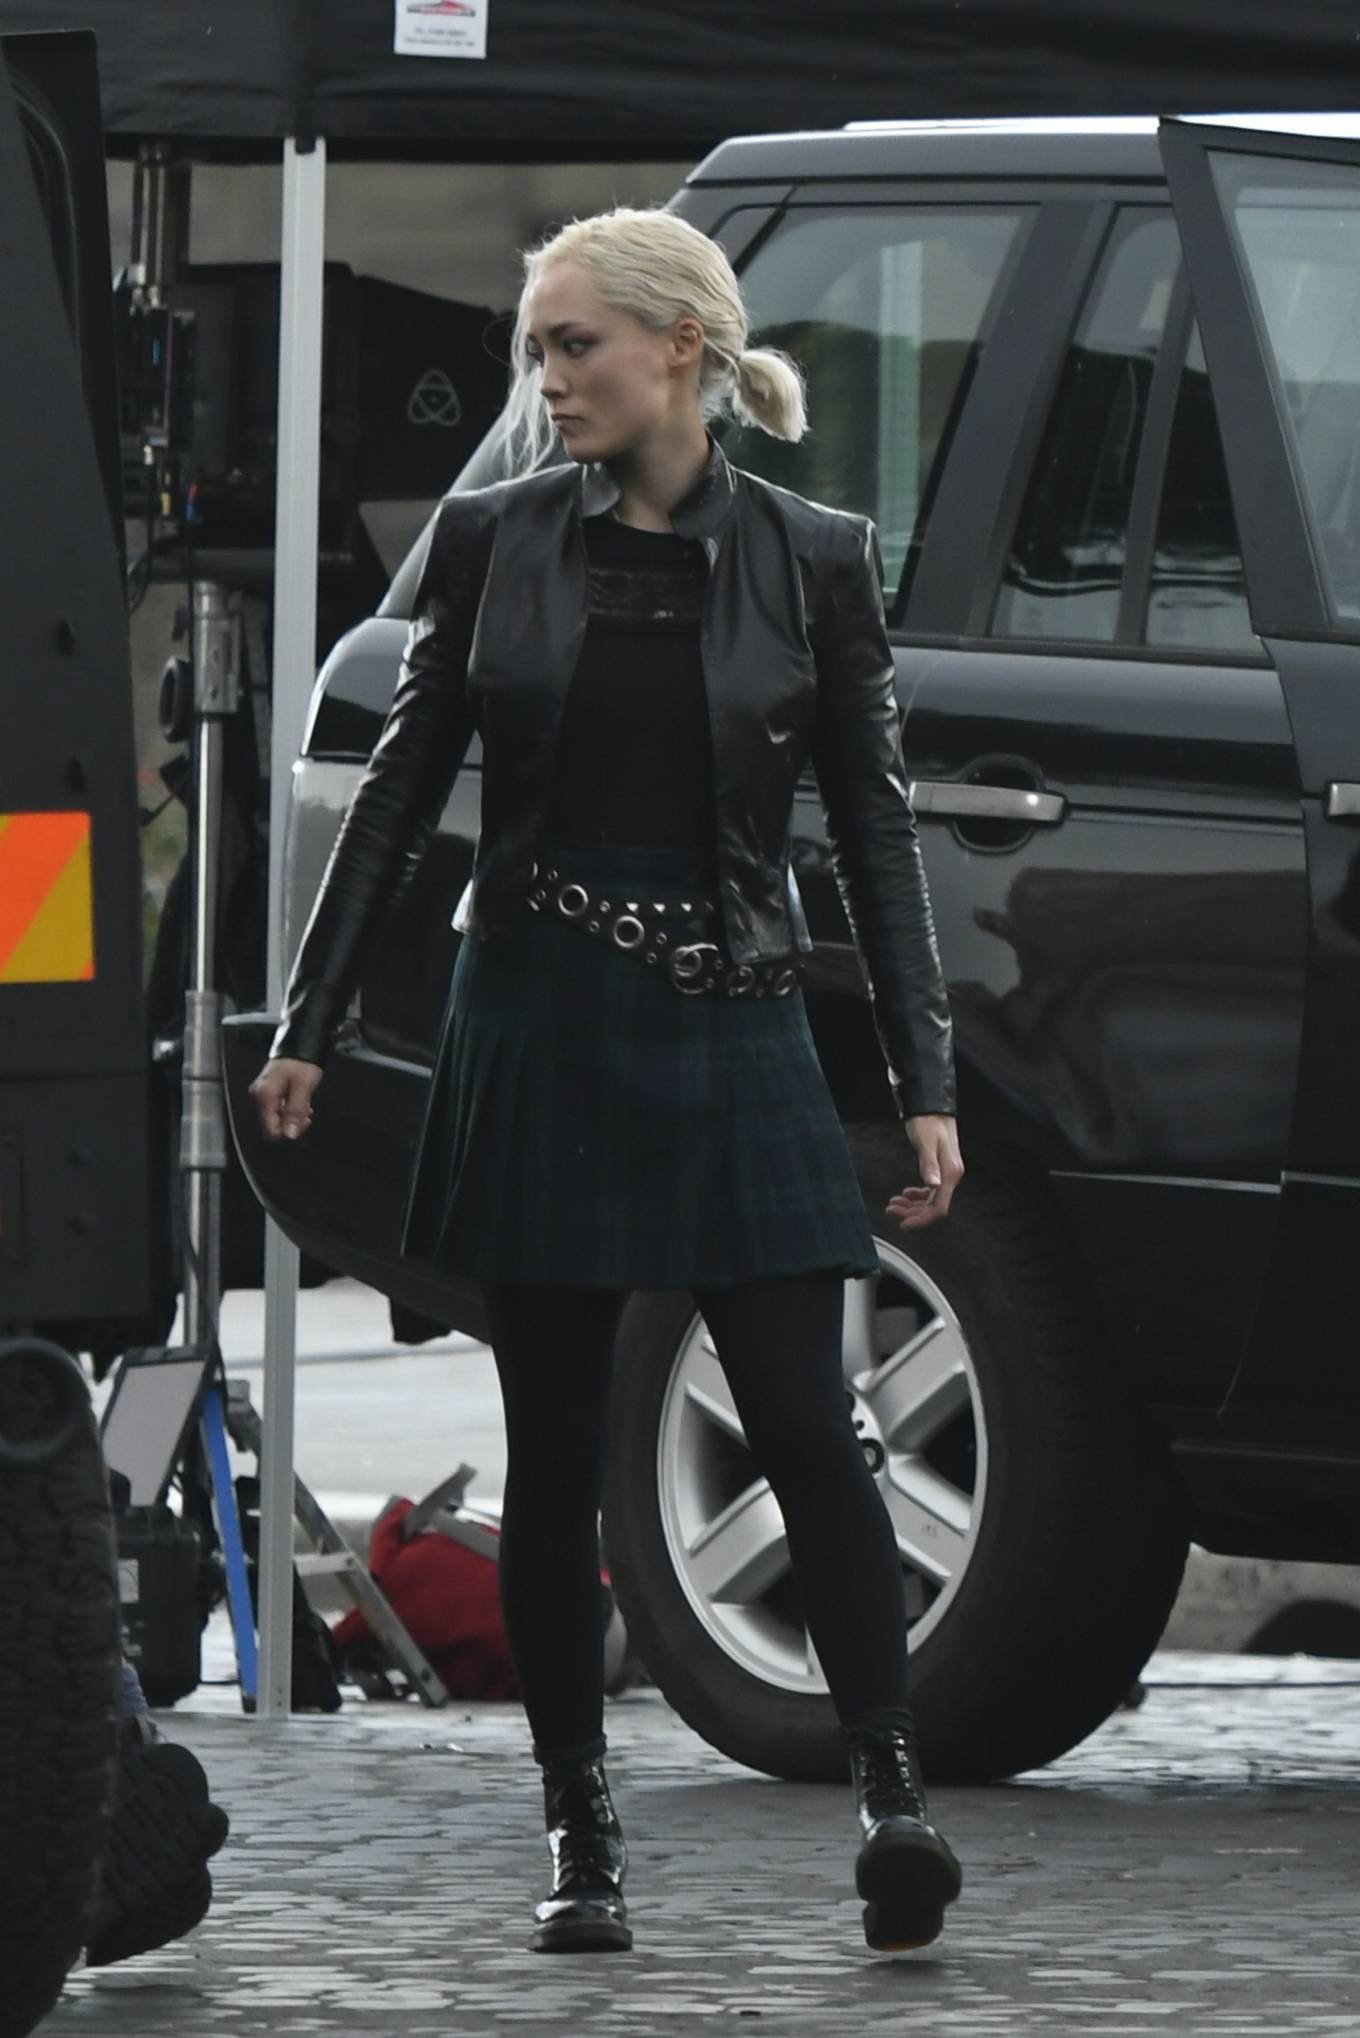 Pom-Klementieff---Filming-a-fight-scene-for-Mission-Impossible-7-in-Rome-12.jpg